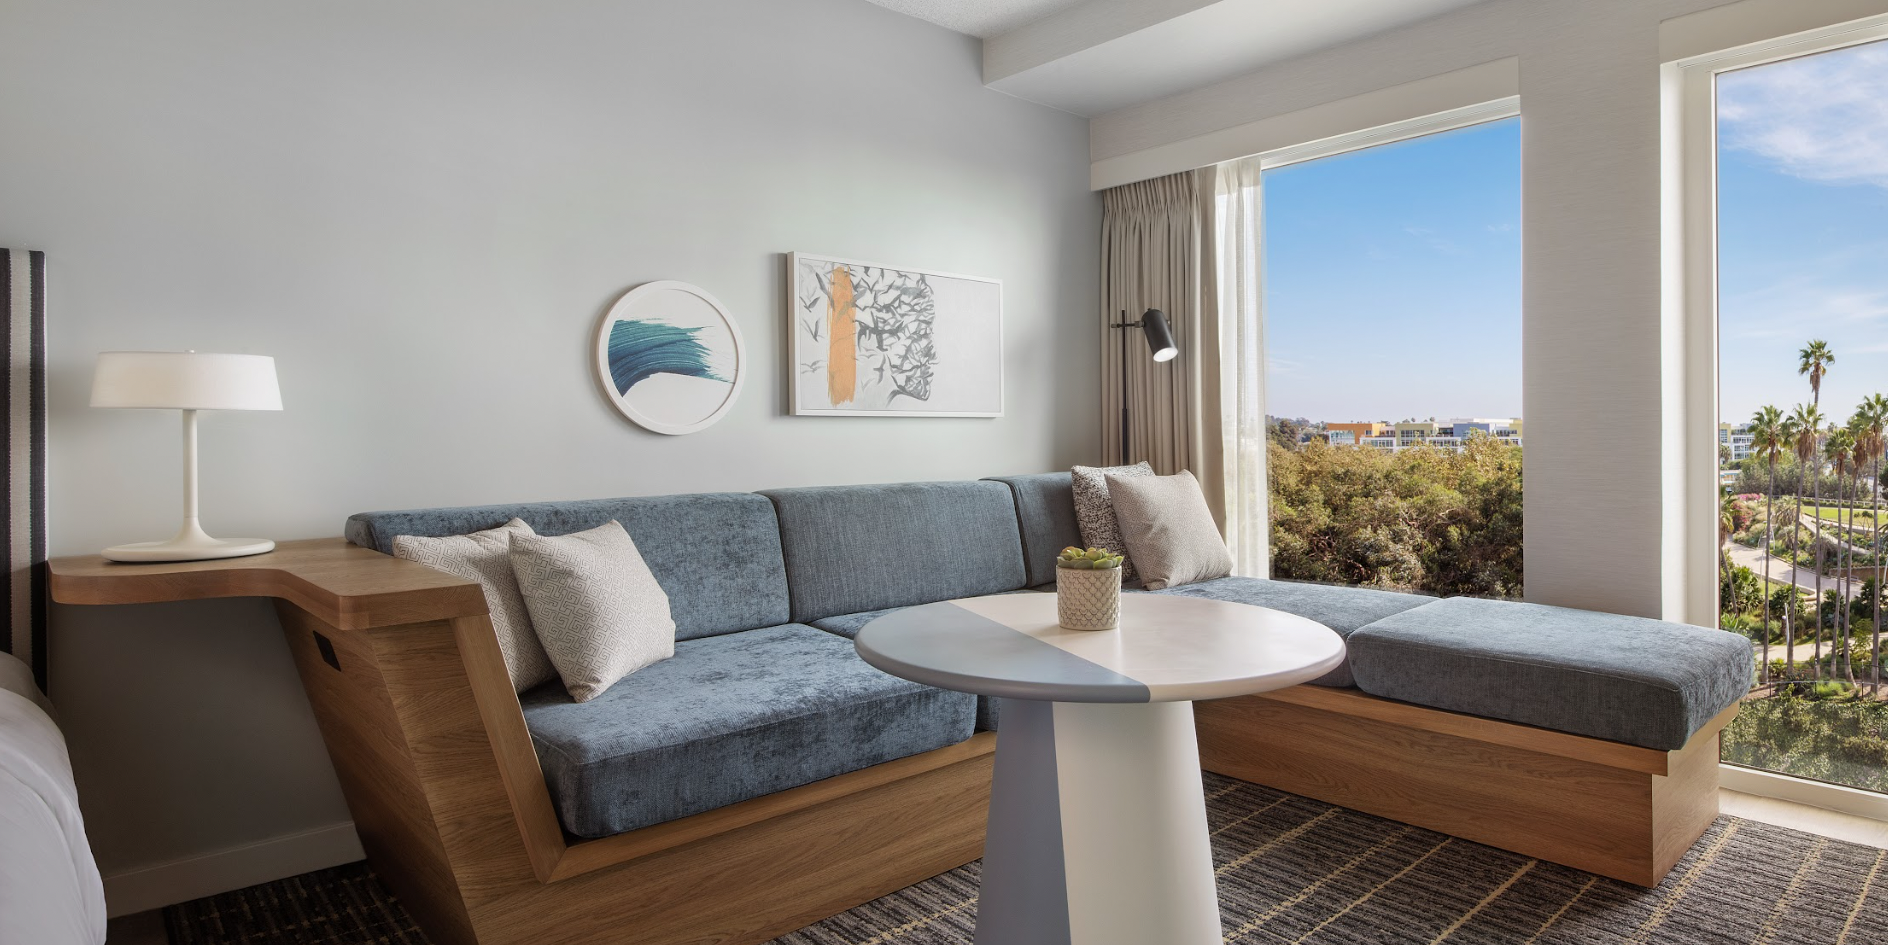 The Coastal Suite at the Pierside Hotel with sweeping views